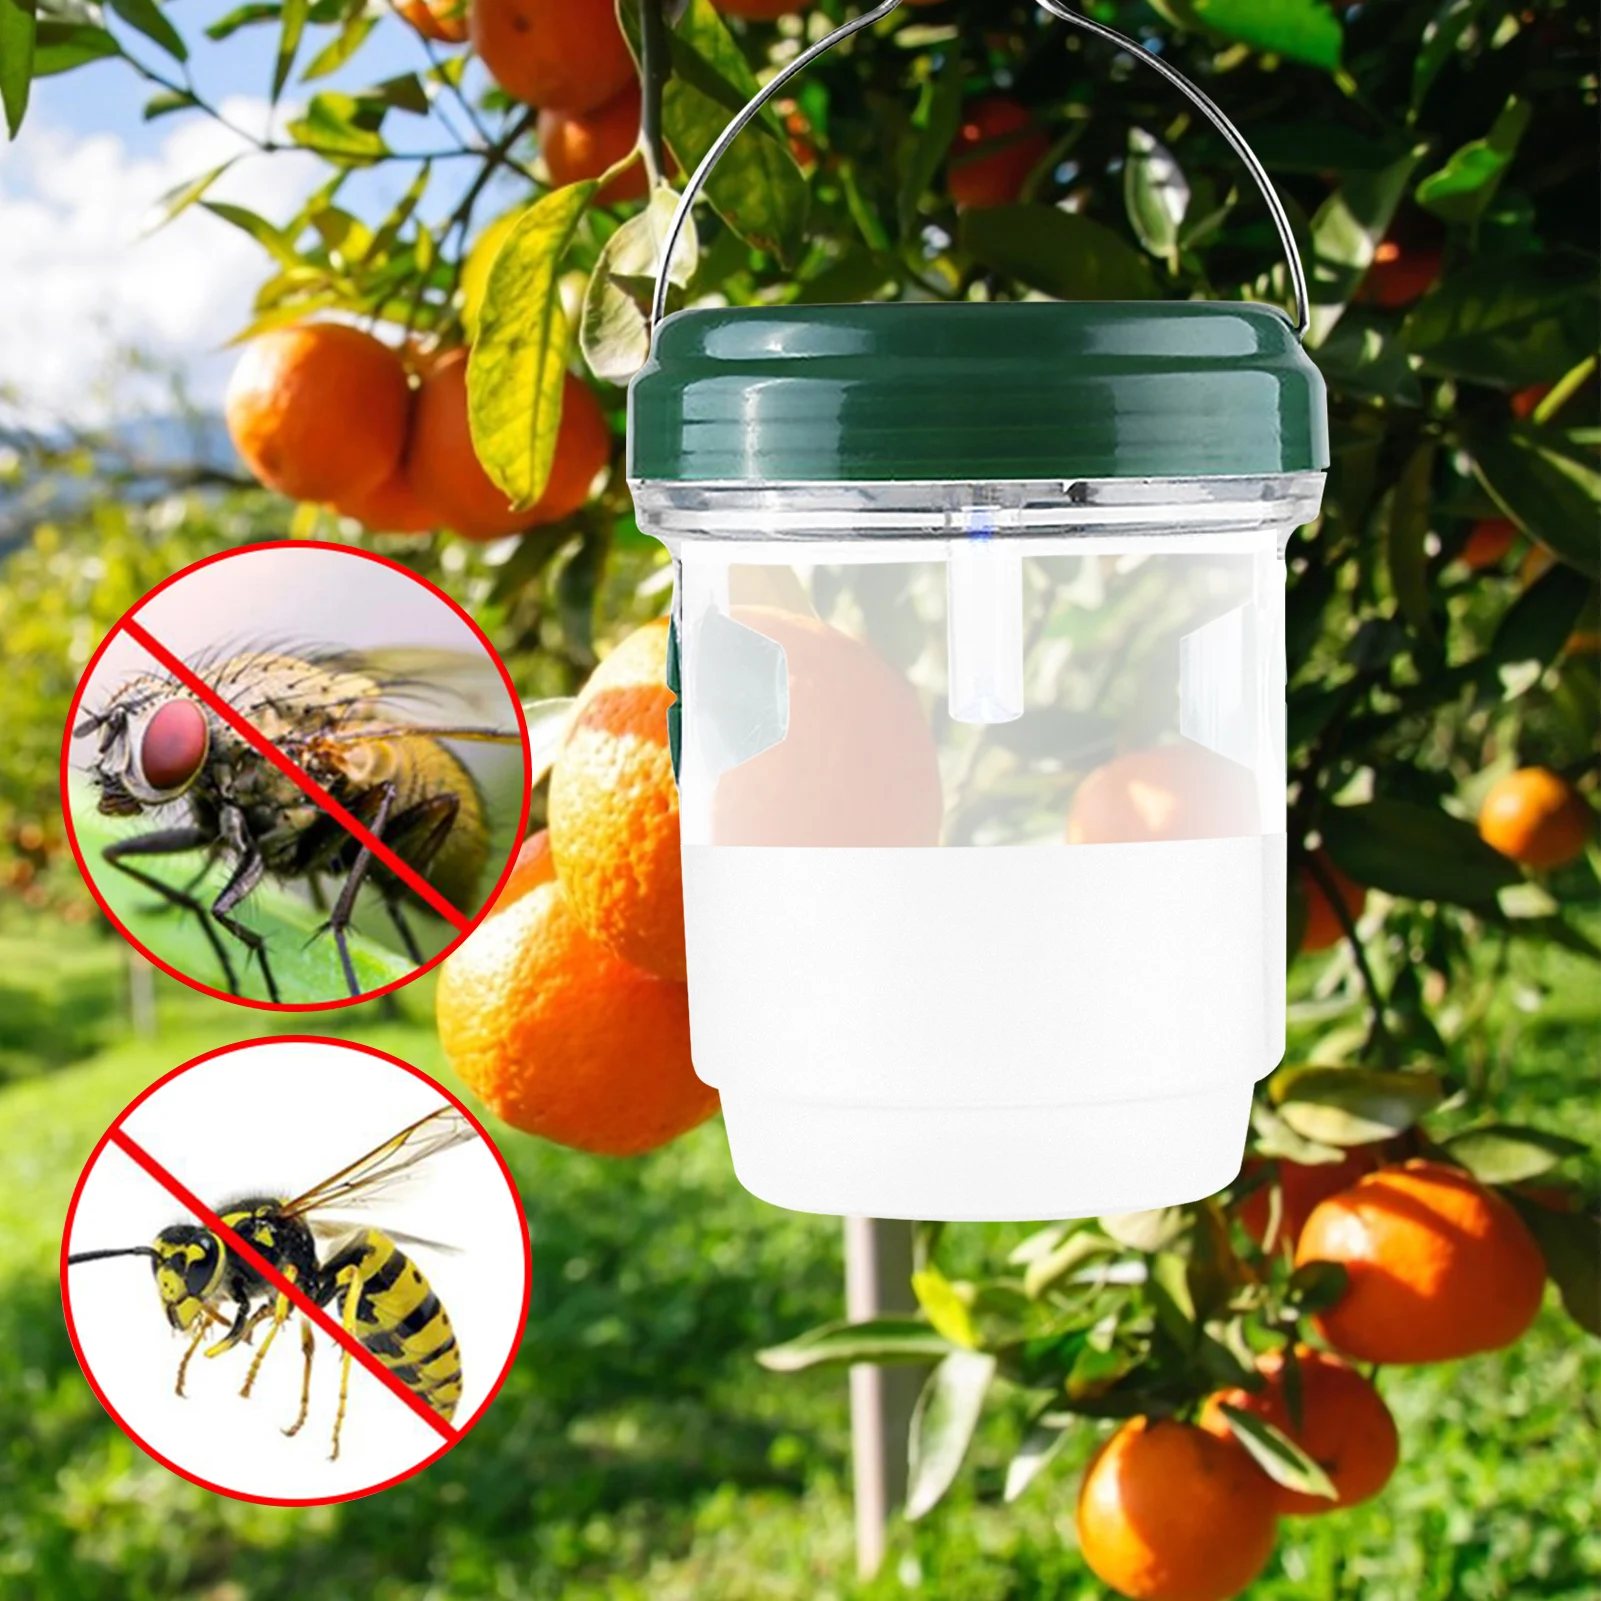 

Outdoor Solar LED Insects Trap Wasp Bee Trapper Catcher Pest Repeller Insect Killer Pest Reject Hornet Repellent Supplies Lights